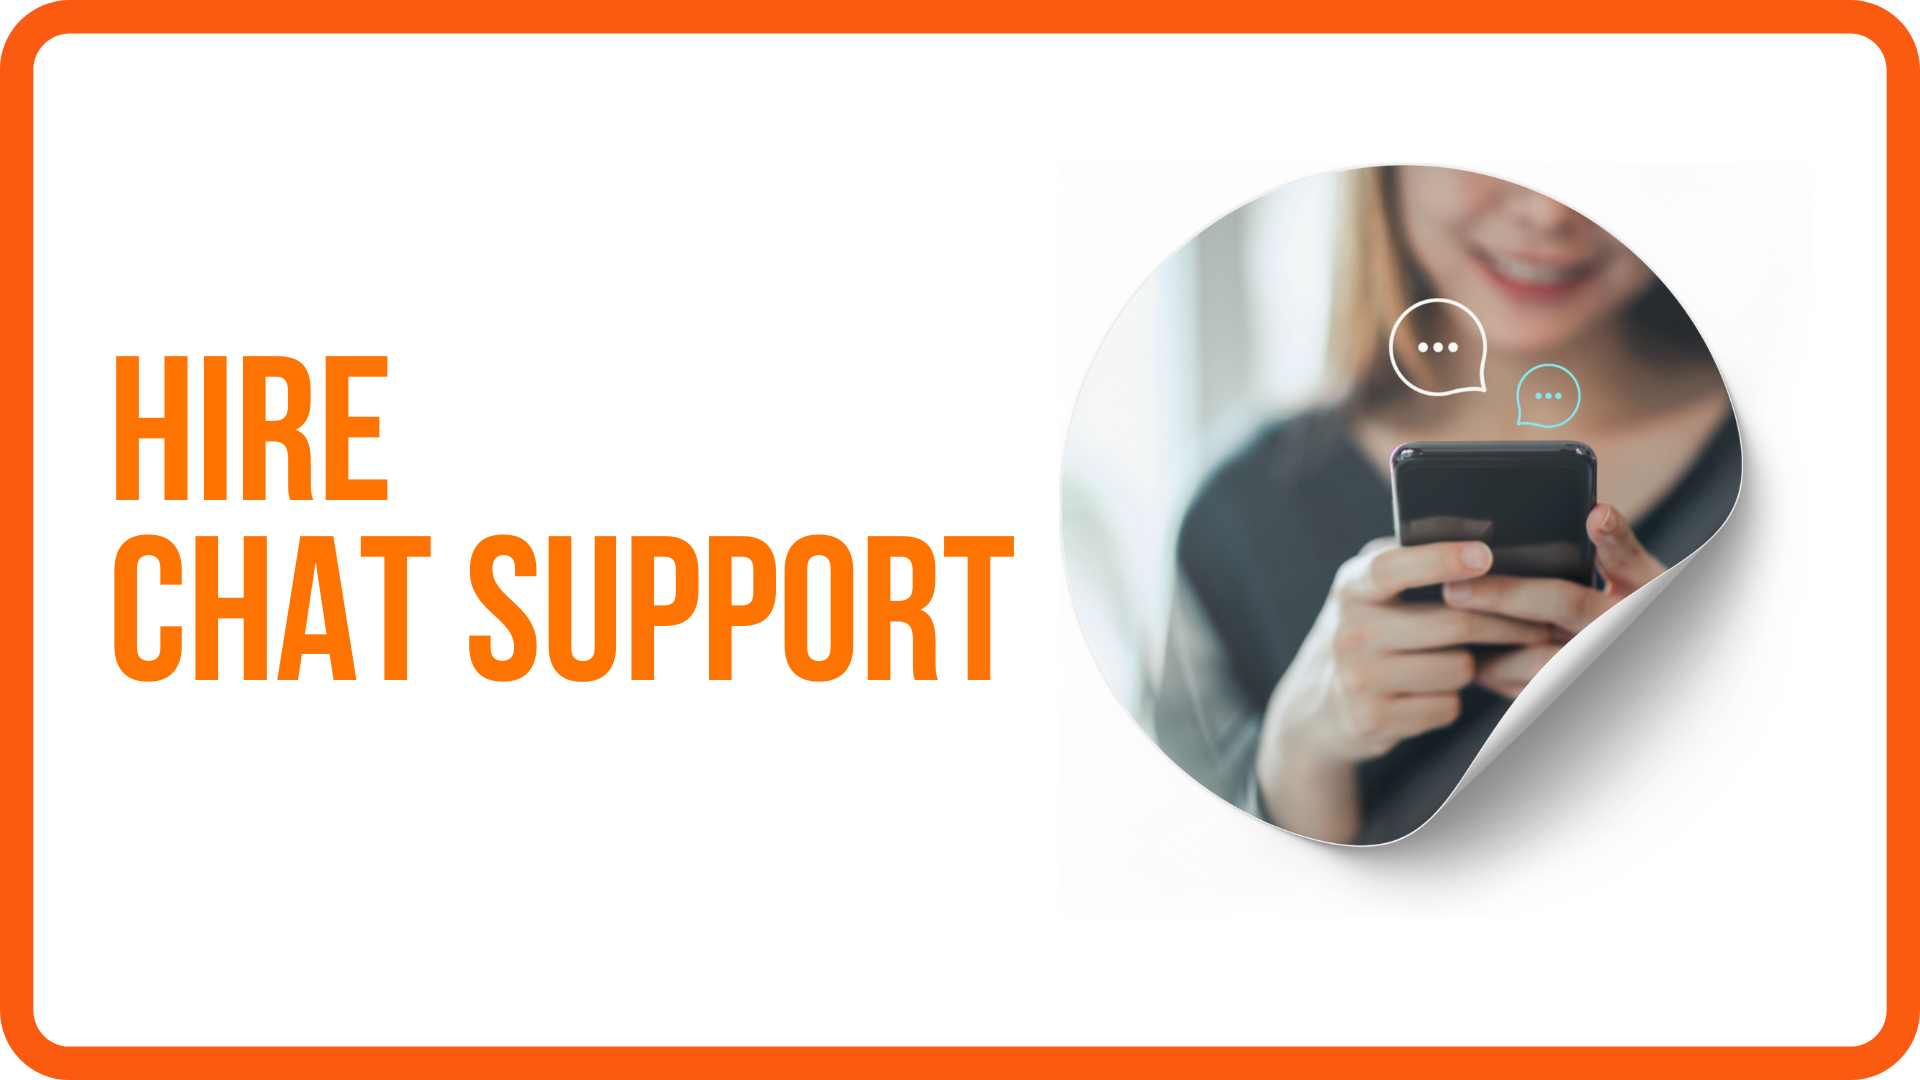 Hire Chat Support: A Smart Move for Your Business